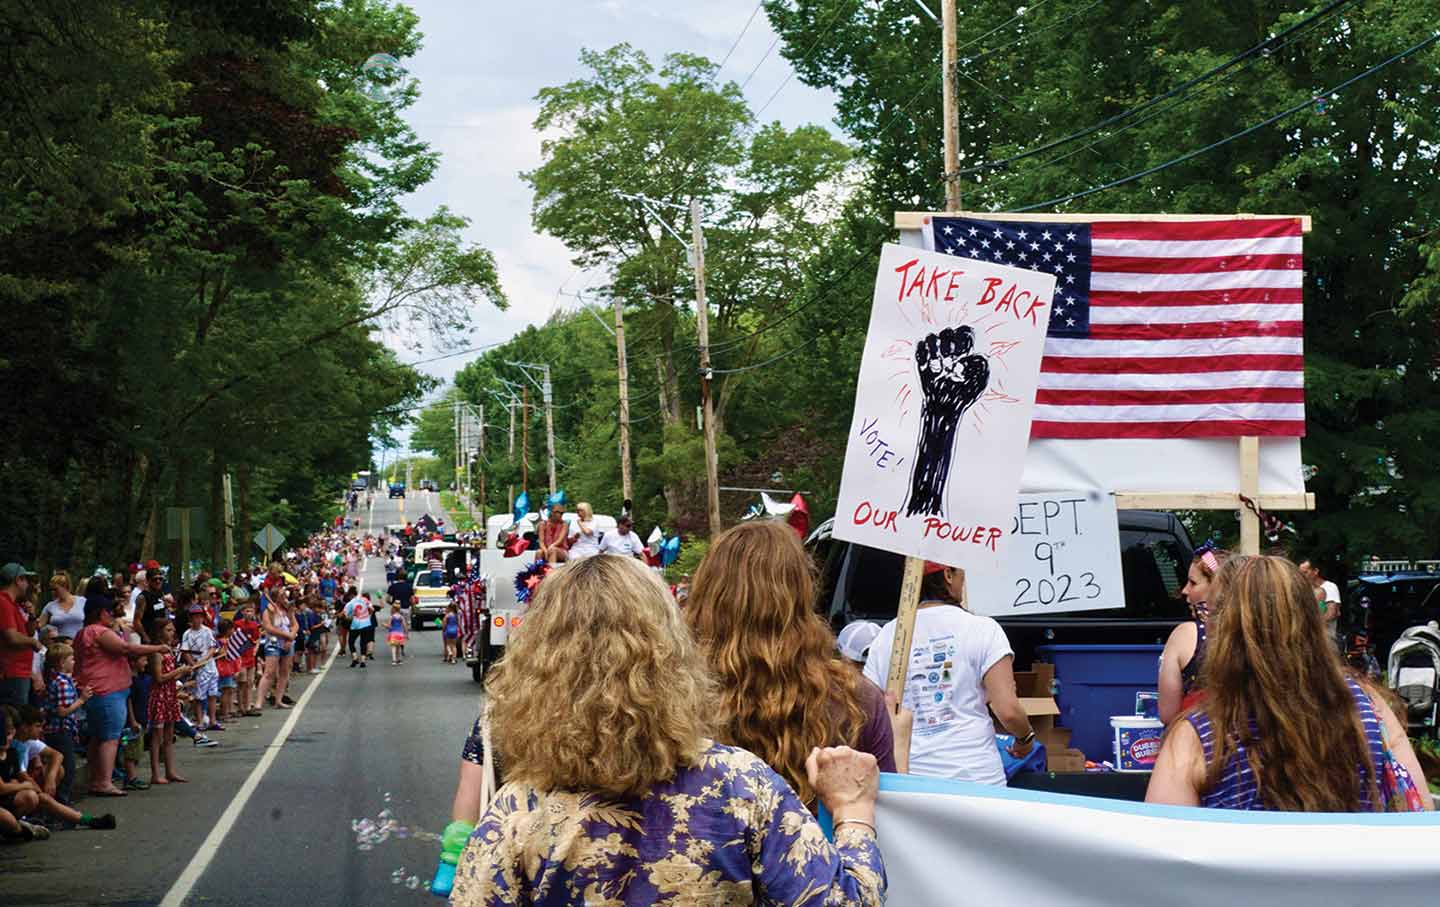 Pine Tree Power supporters at a march on July 4.